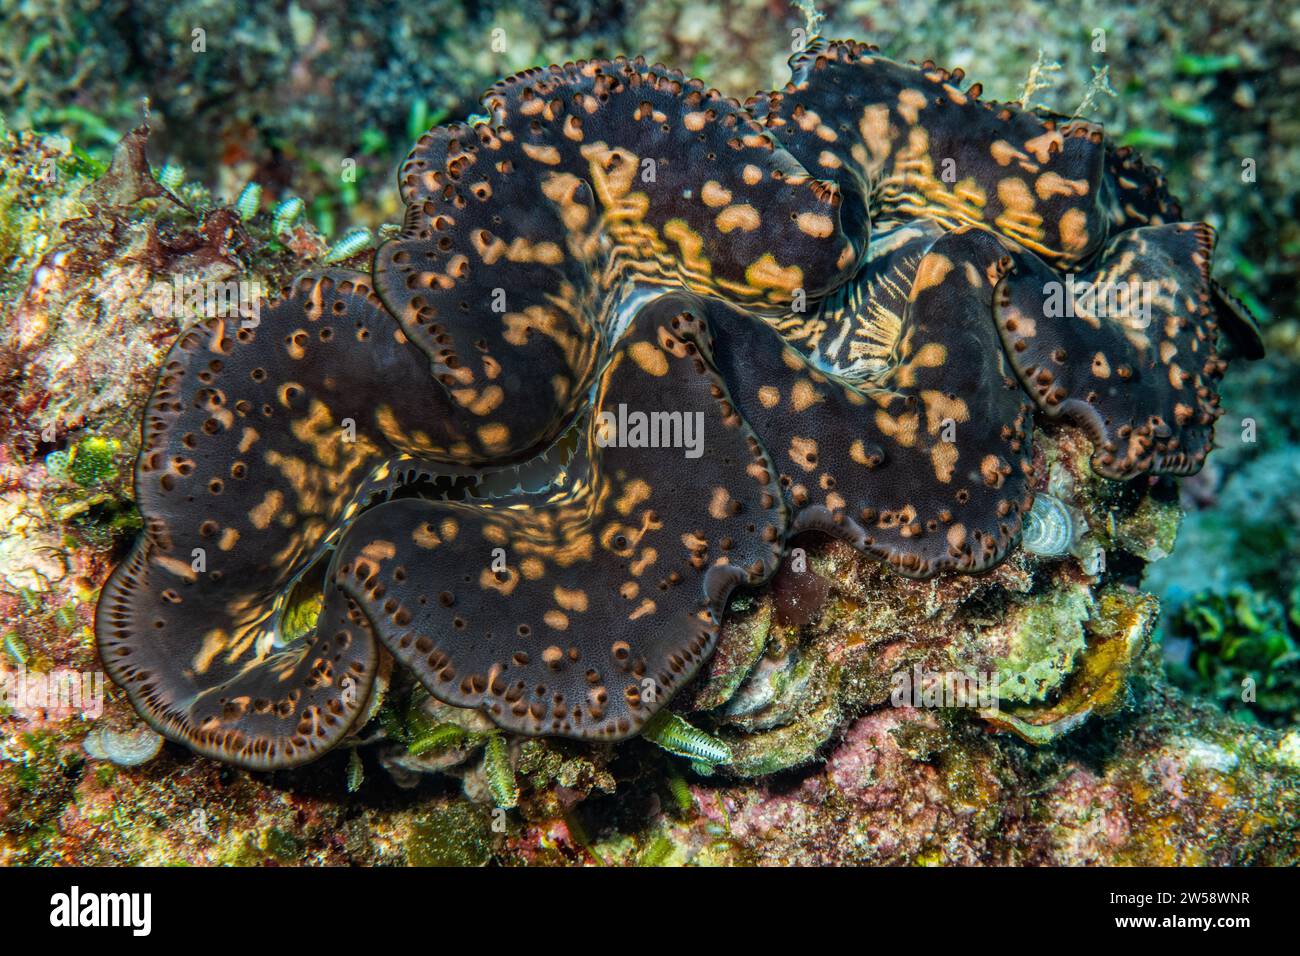 Close-up of giant clam (Tridacna maxima) with open shell mantle and patterned mantle tissue with clearly visible mantle lips, Indian Ocean, Mascarene Stock Photo